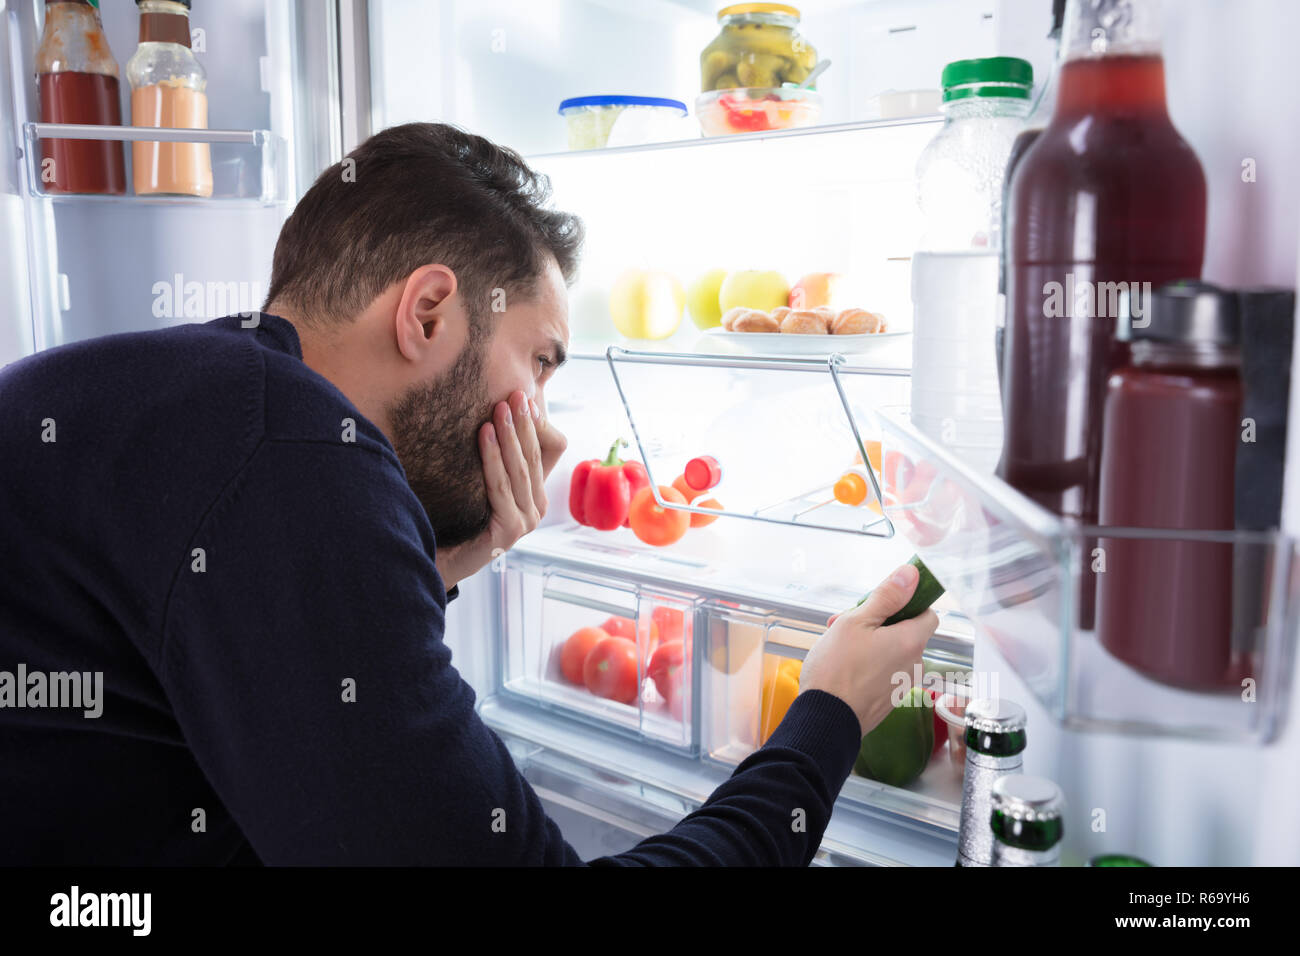 Man Noticing Smell Coming From Foul Food In Refrigerator Stock Photo